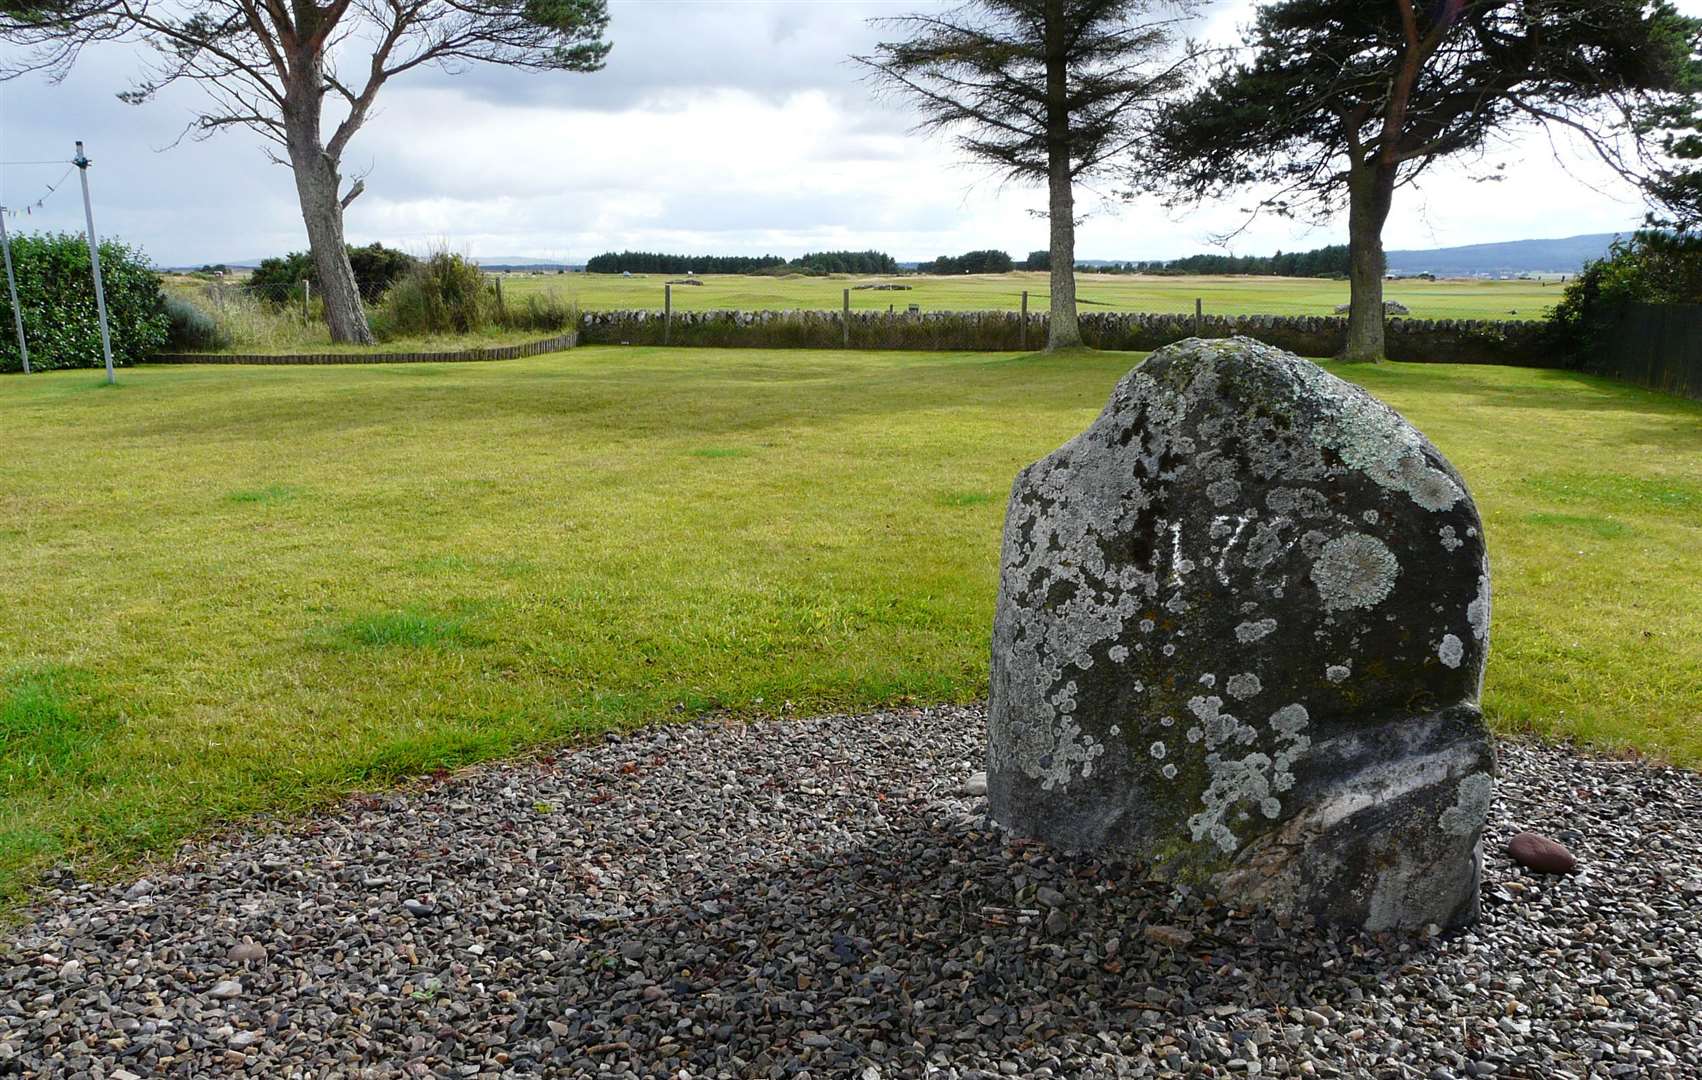 The Witch's Stone, erected in memory of Janet Horne of Dornoch, the last woman to be executed for witchcraft in Scotland.